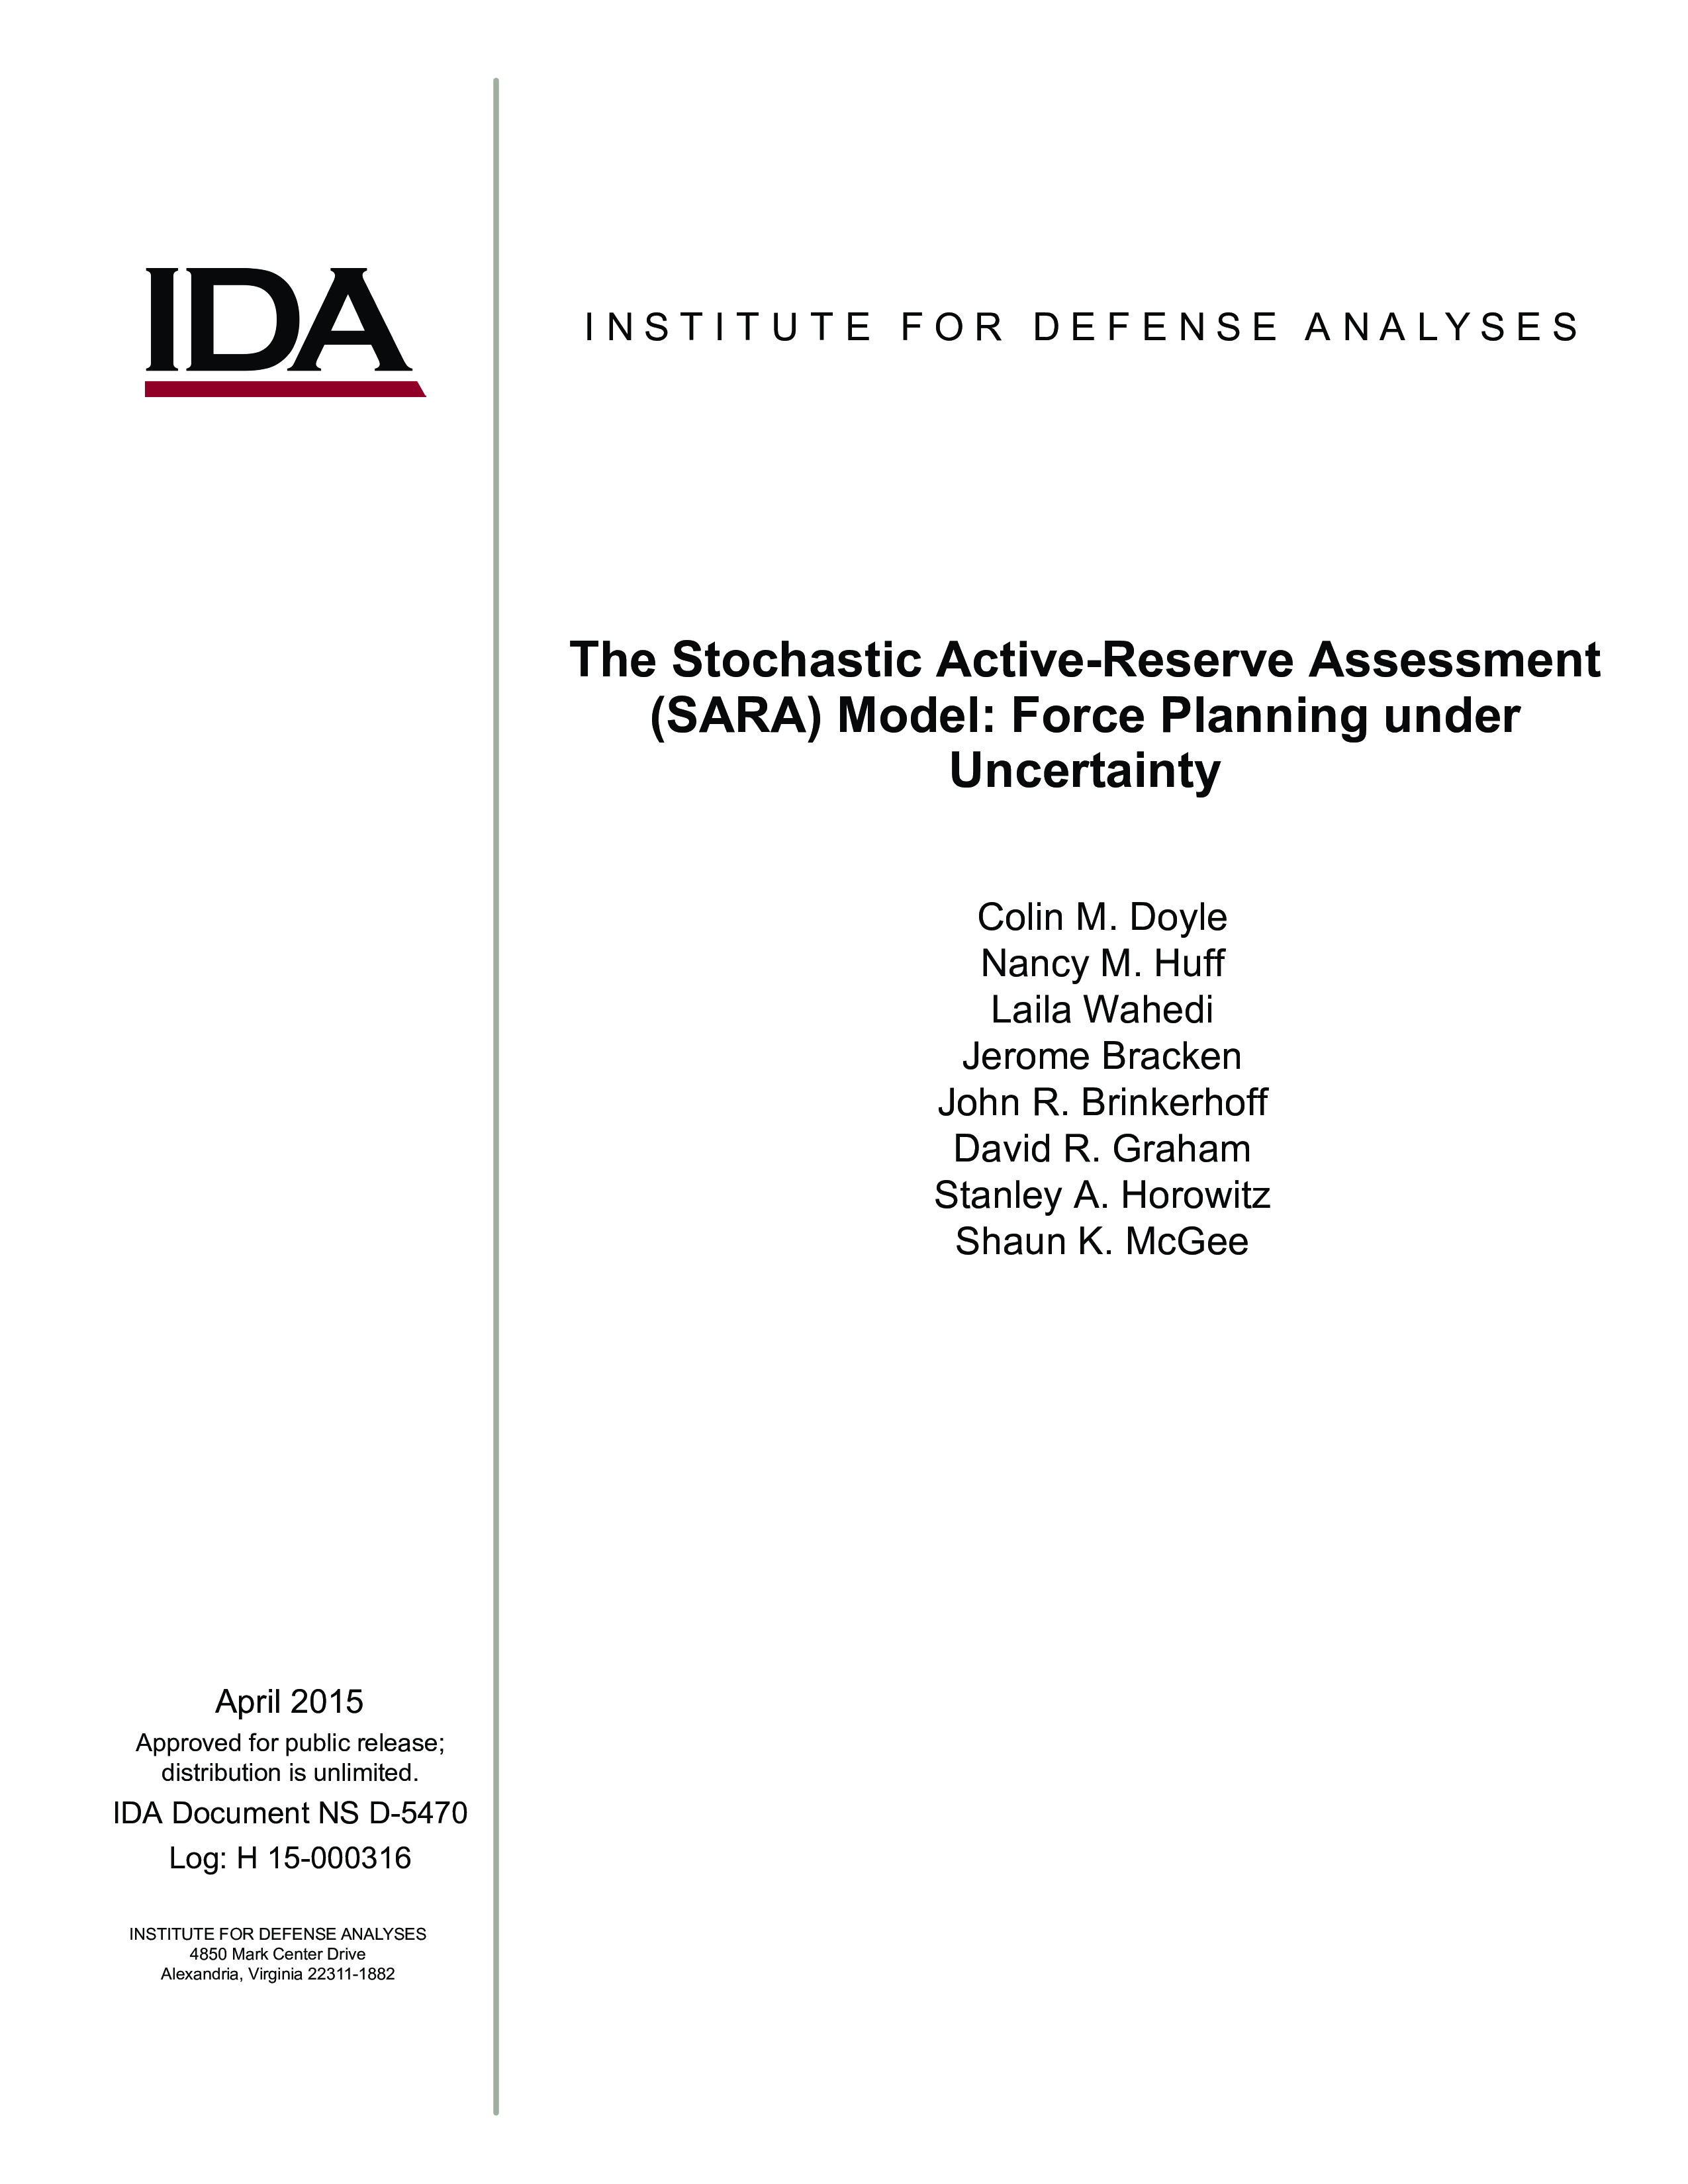 The Stochastic Active-Reserve Assessment (SARA) Model: Force Planning under Uncertainty